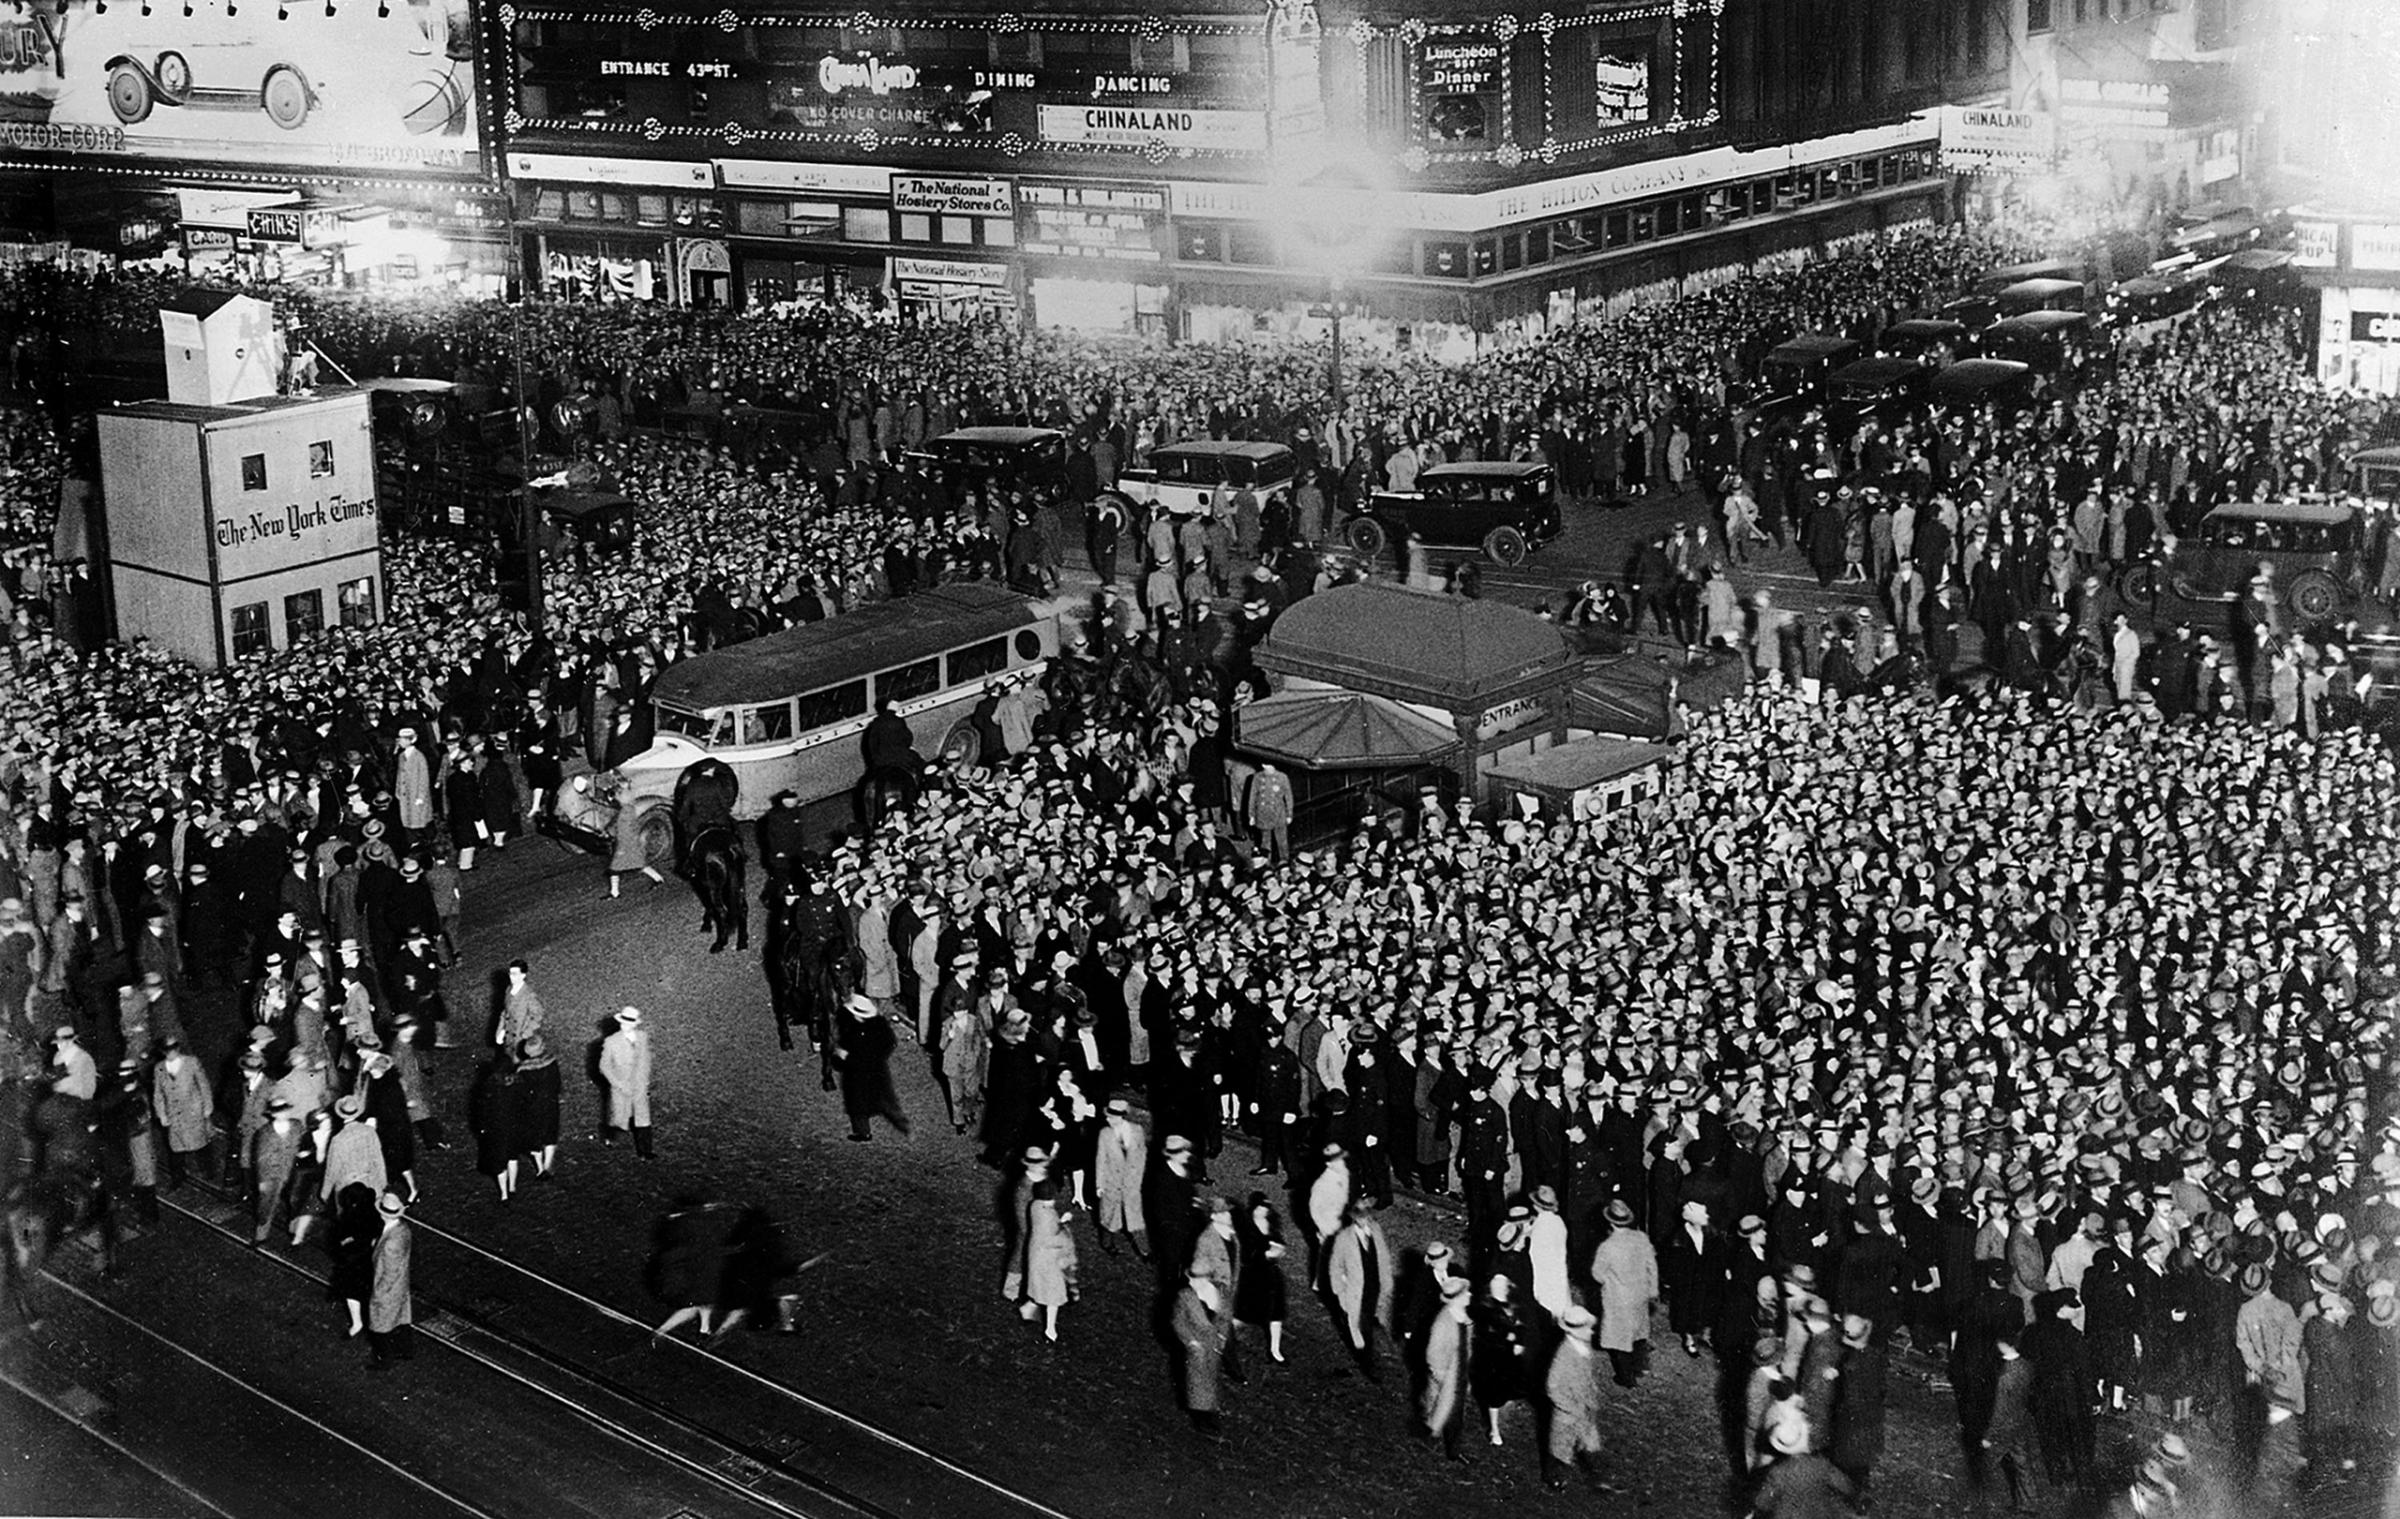 A crowd of people gathered in Times Square to watch the returns of the election to decide the new American President on Nov. 13, 1928. Herbert Hoover was returned with an overwhelming majority.